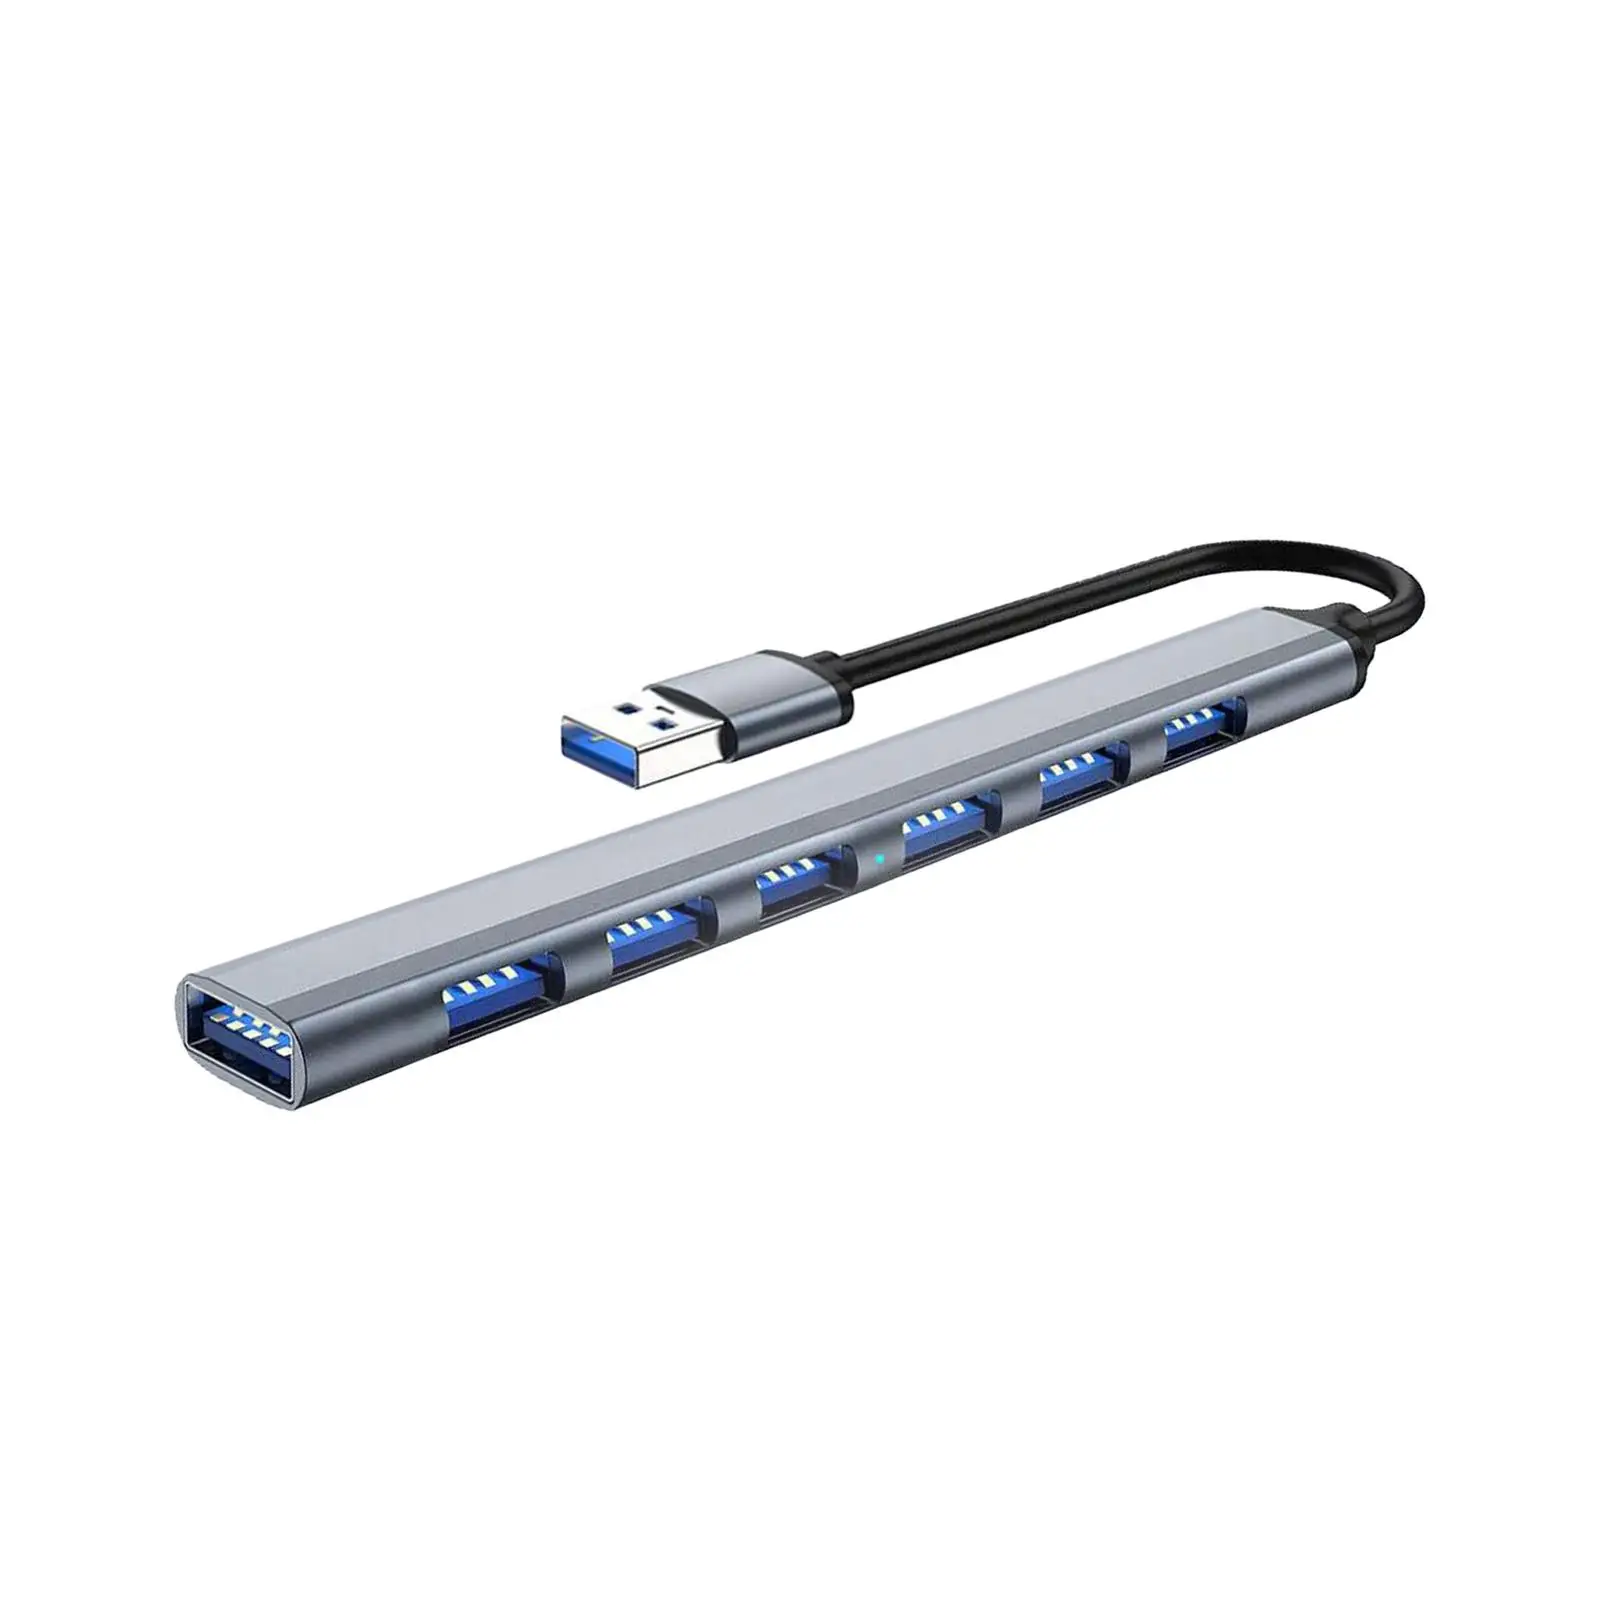 USB 3.0 Hub Audio Output 7 USB Ports Plug and Play Aluminum Alloy TF Card Reader Easy to Use USB Splitter 1 in 7 Out